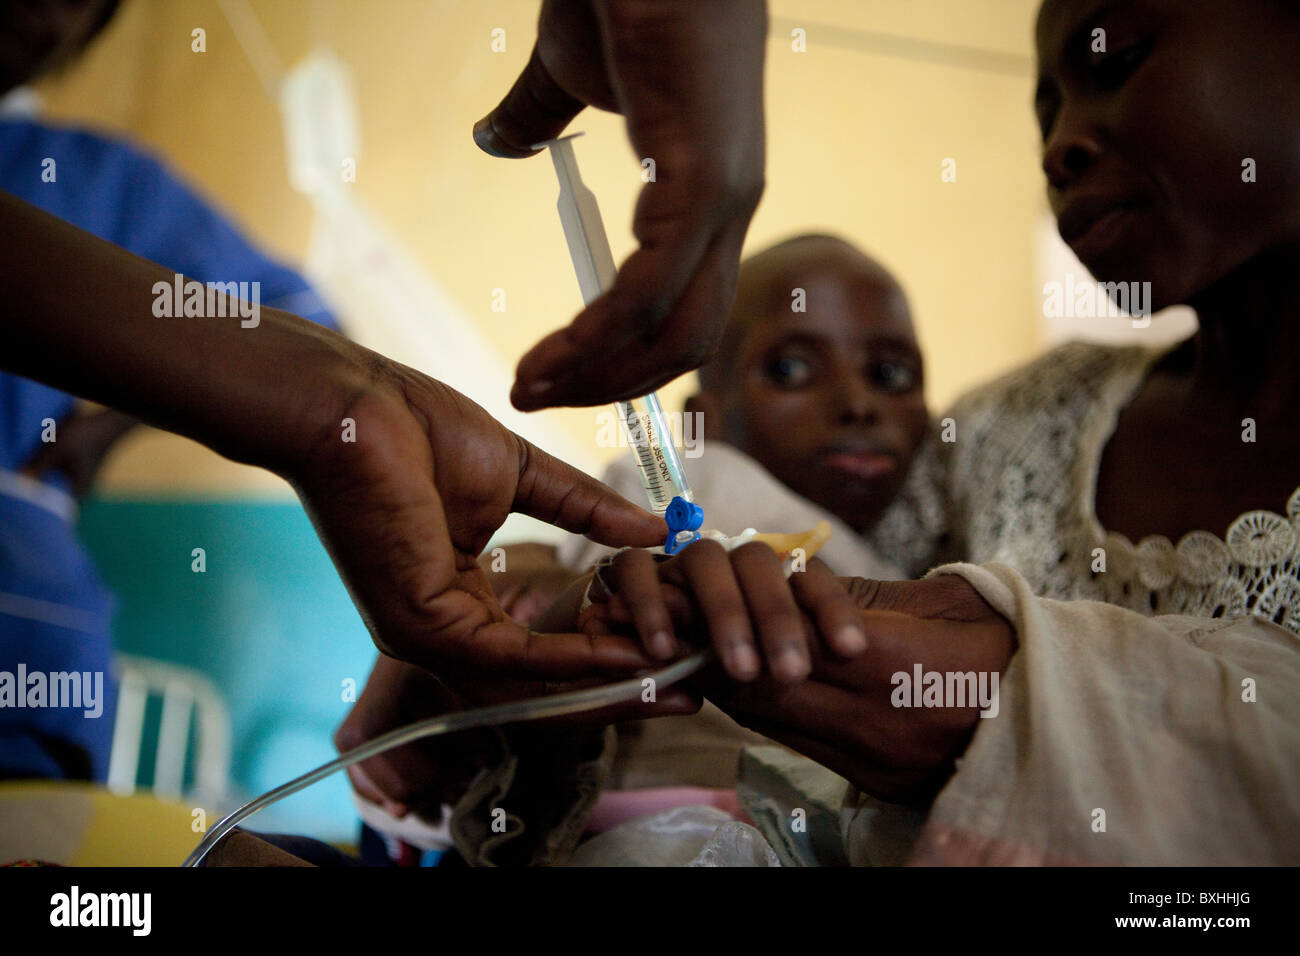 A child dying of AIDS receives medical treatment in a hospital in Amuria, Uganda, East Africa. Stock Photo